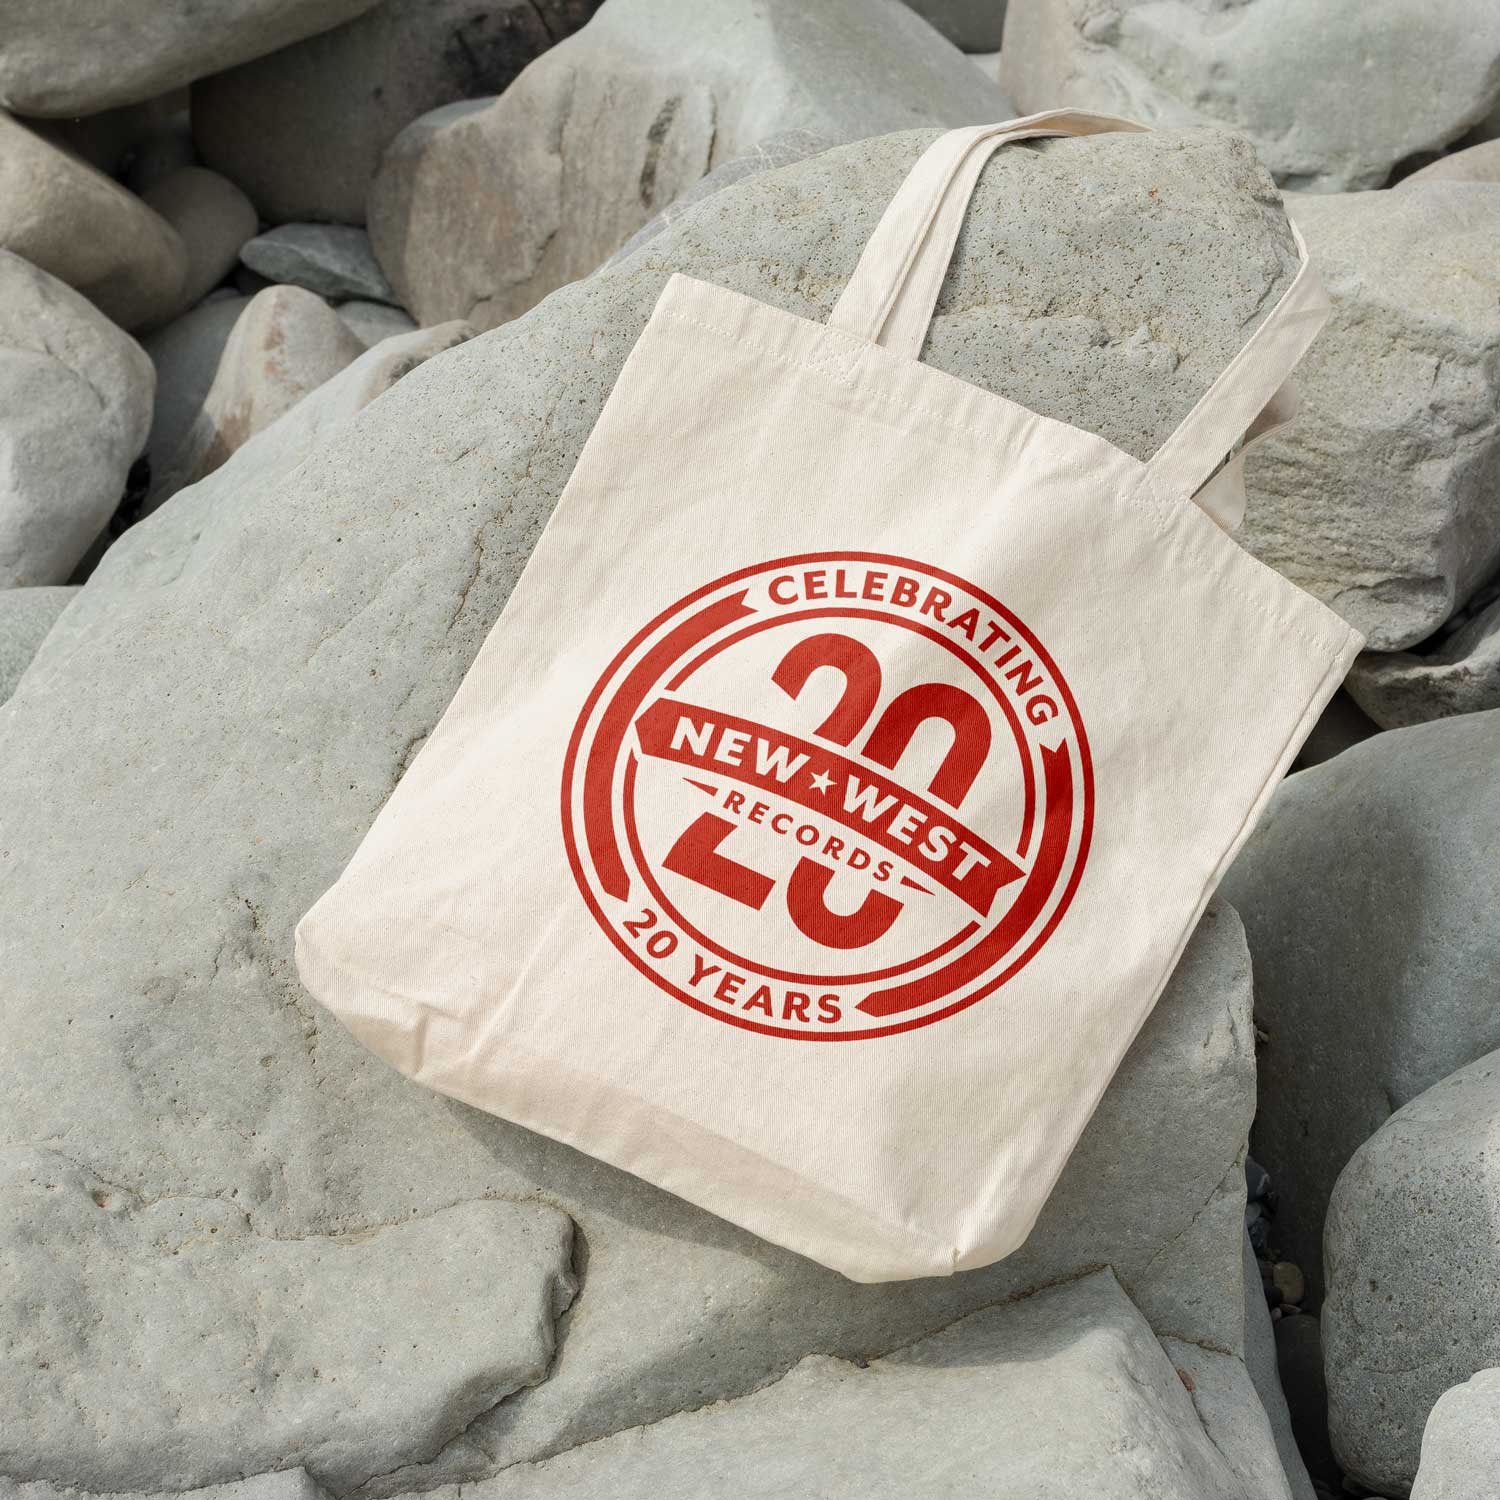 New West 20th Anniversary Tote Bag